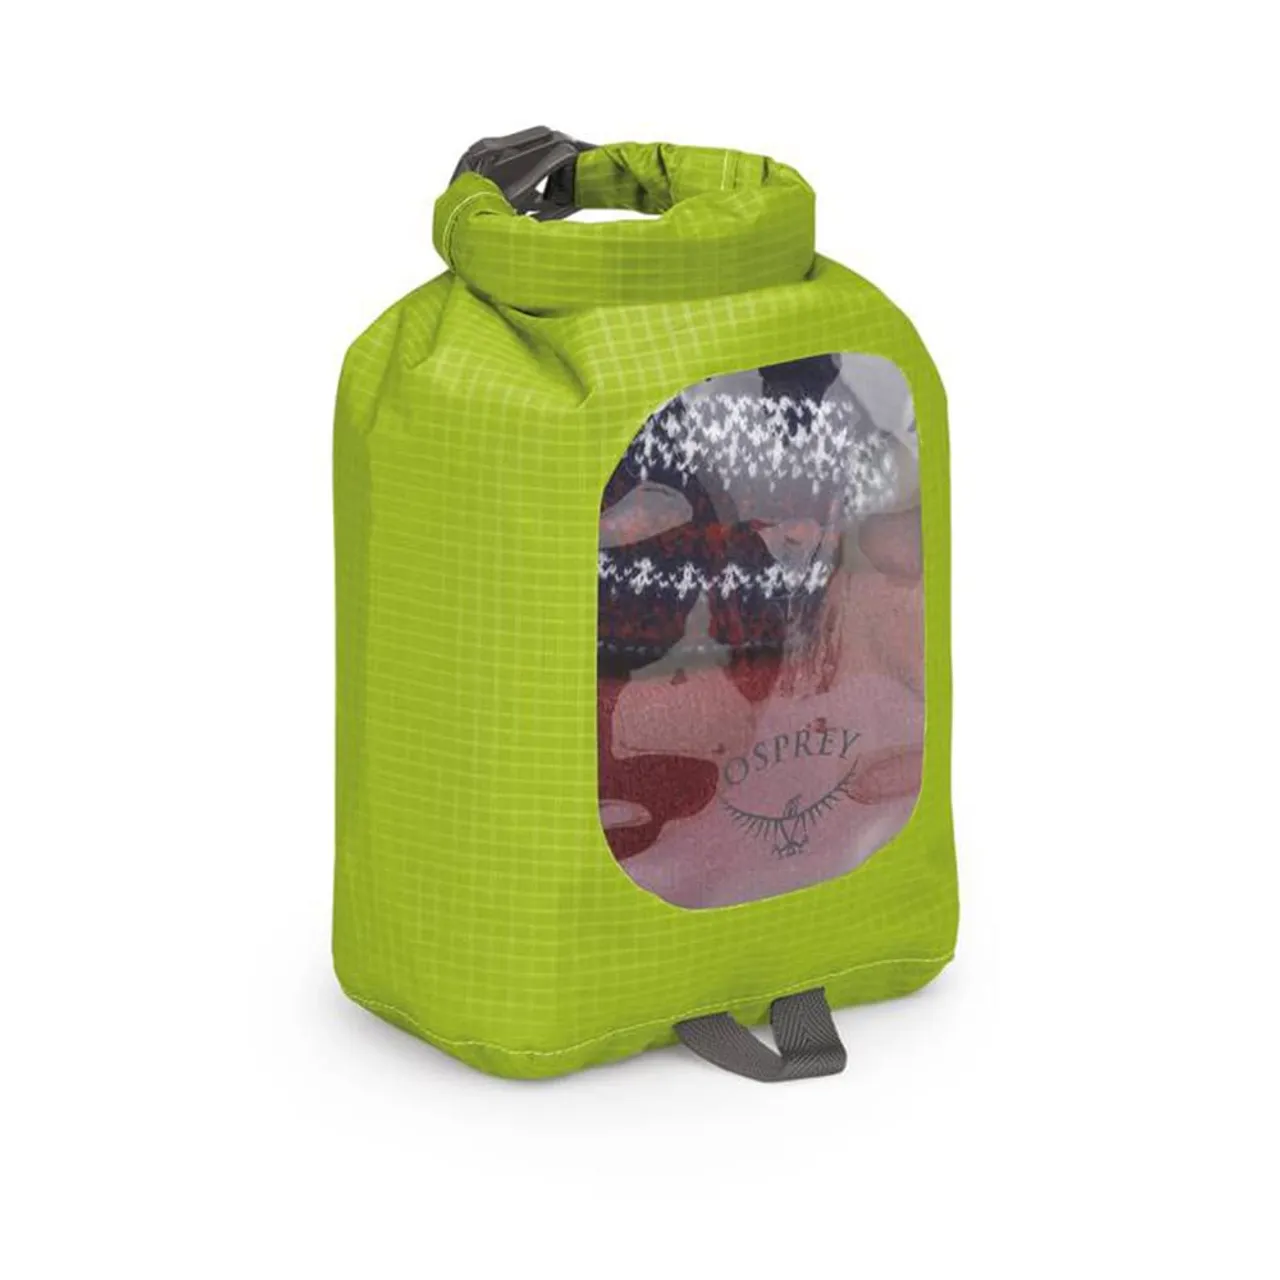 Osprey Dry Sack 3 with window Unisex Accessories - Outdoor